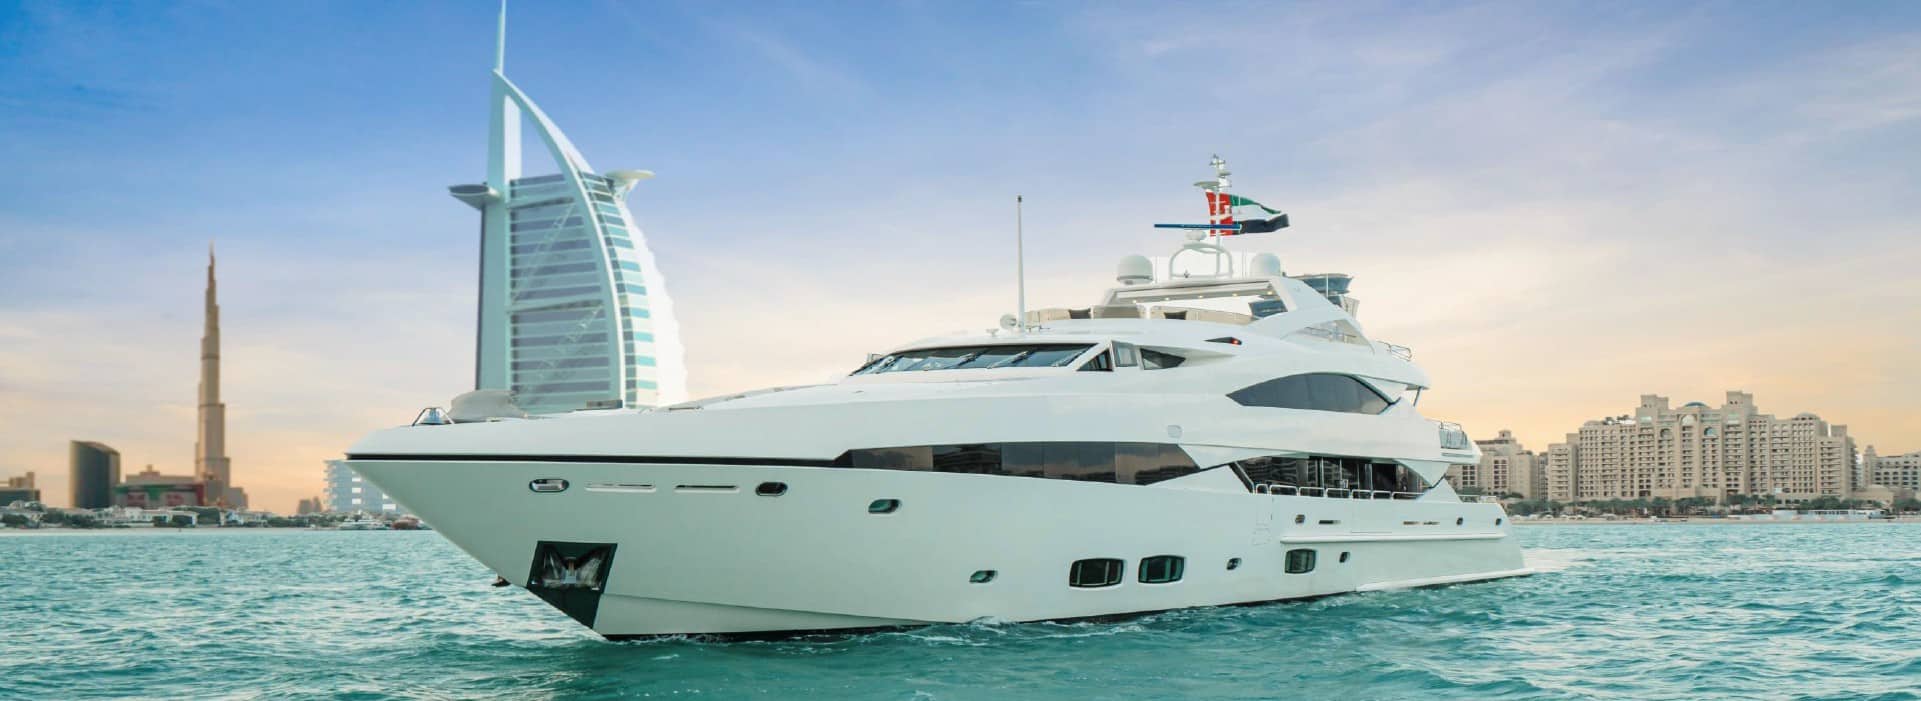 Luxury Yachts of Dubai a once-in-a-lifetime experience for tourists and visitors